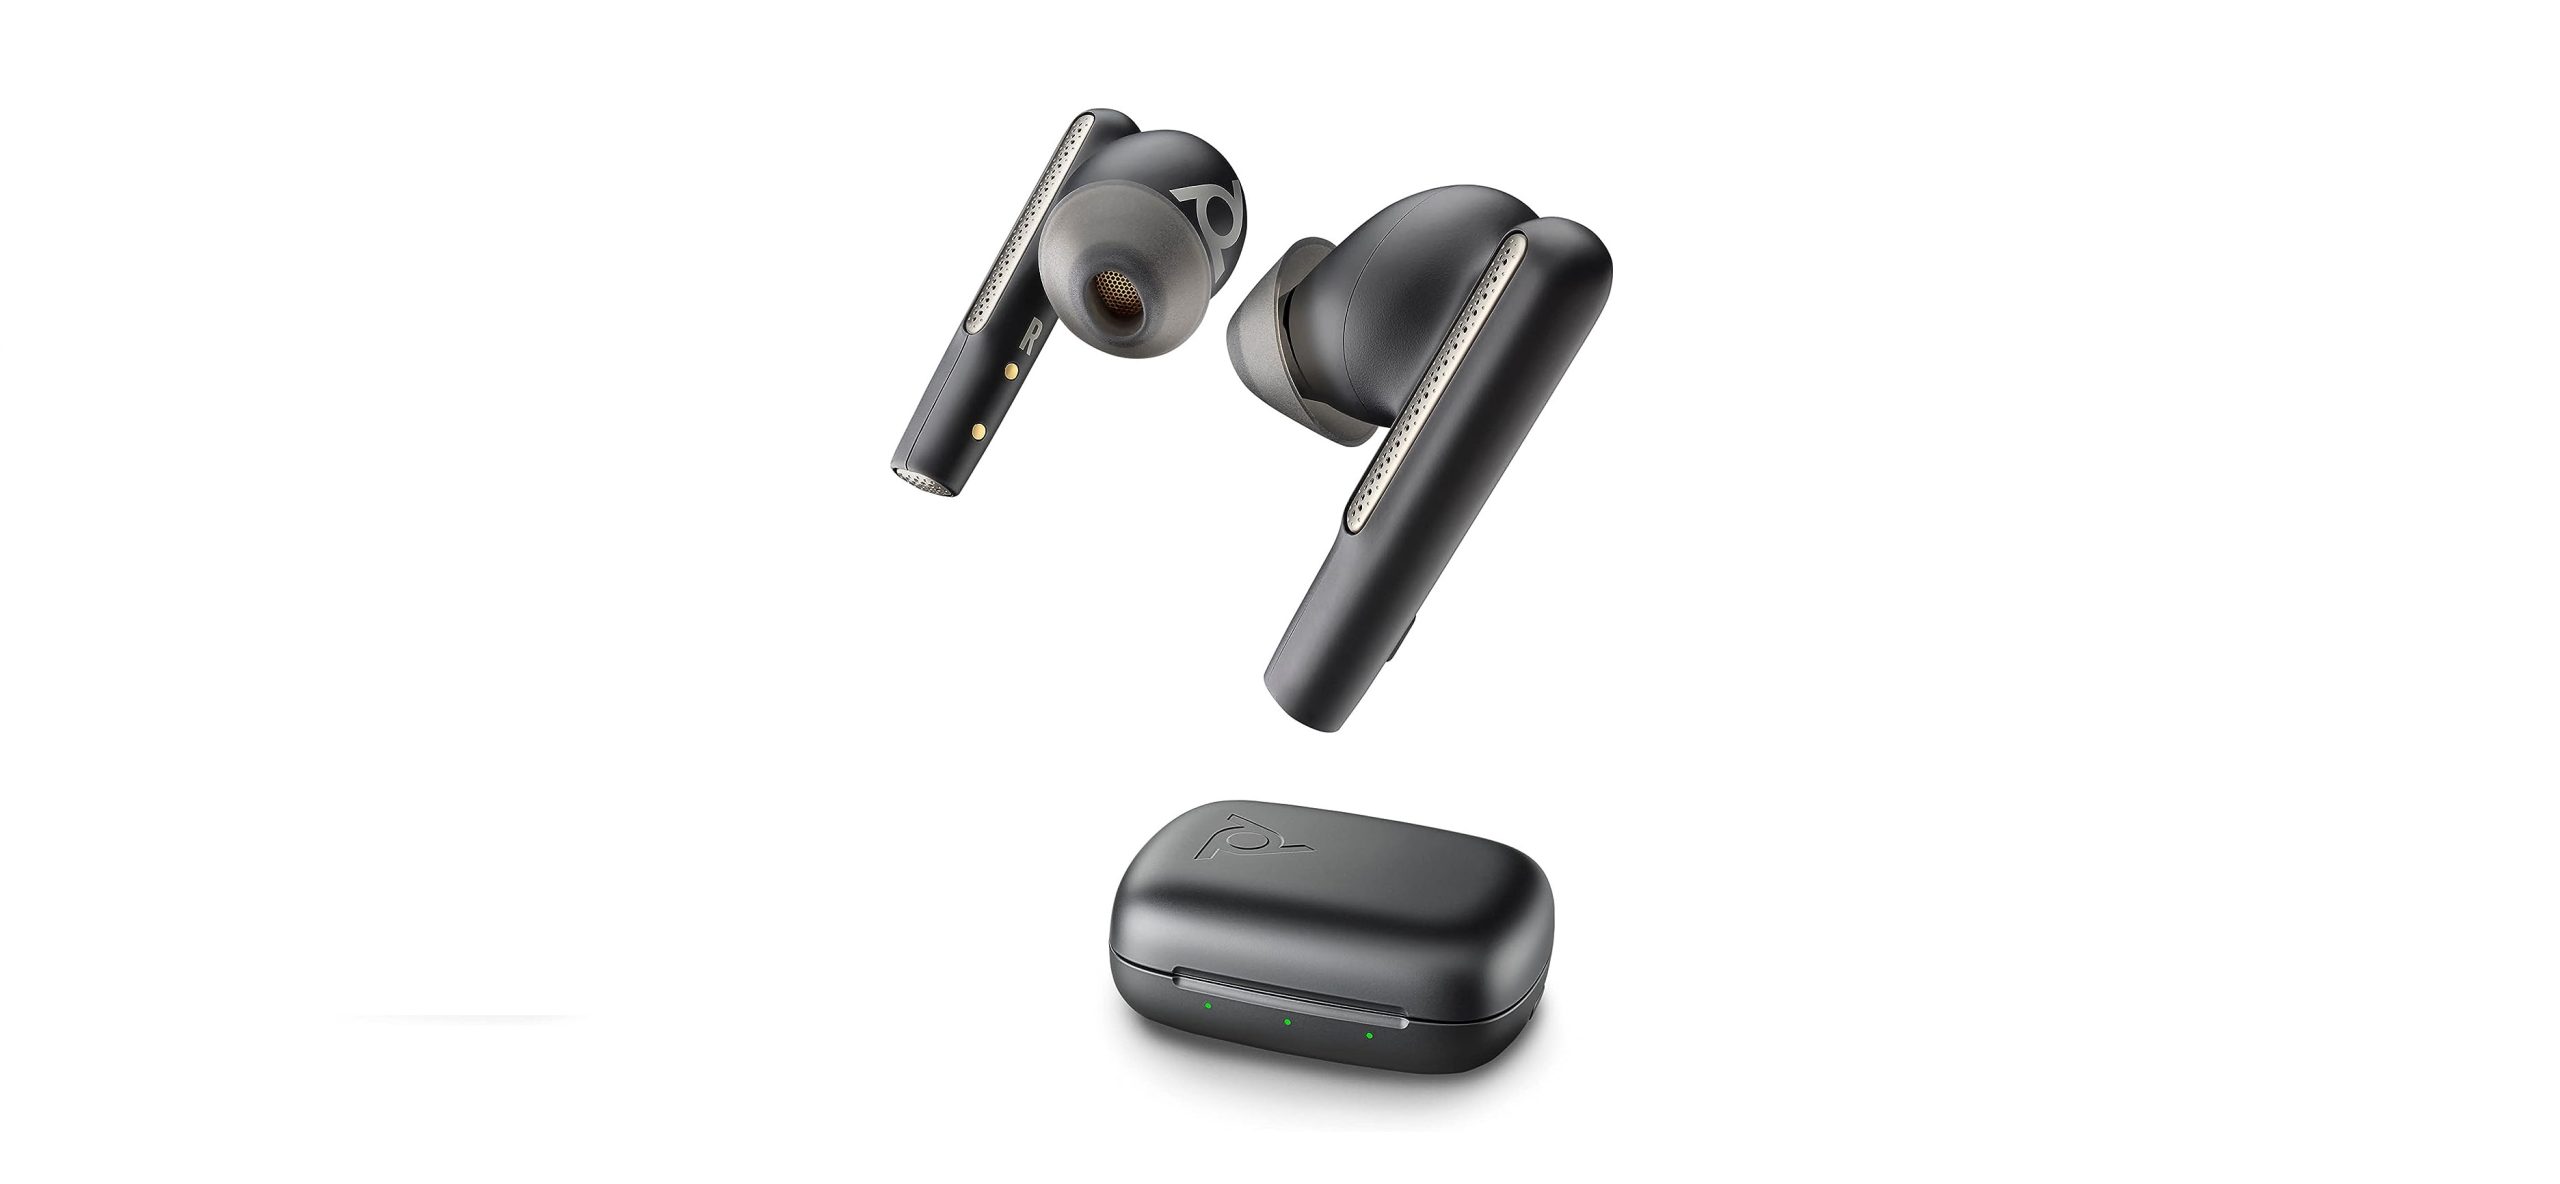 A WOnderful Christmas Gift for Women - Best Wireless Earbuds